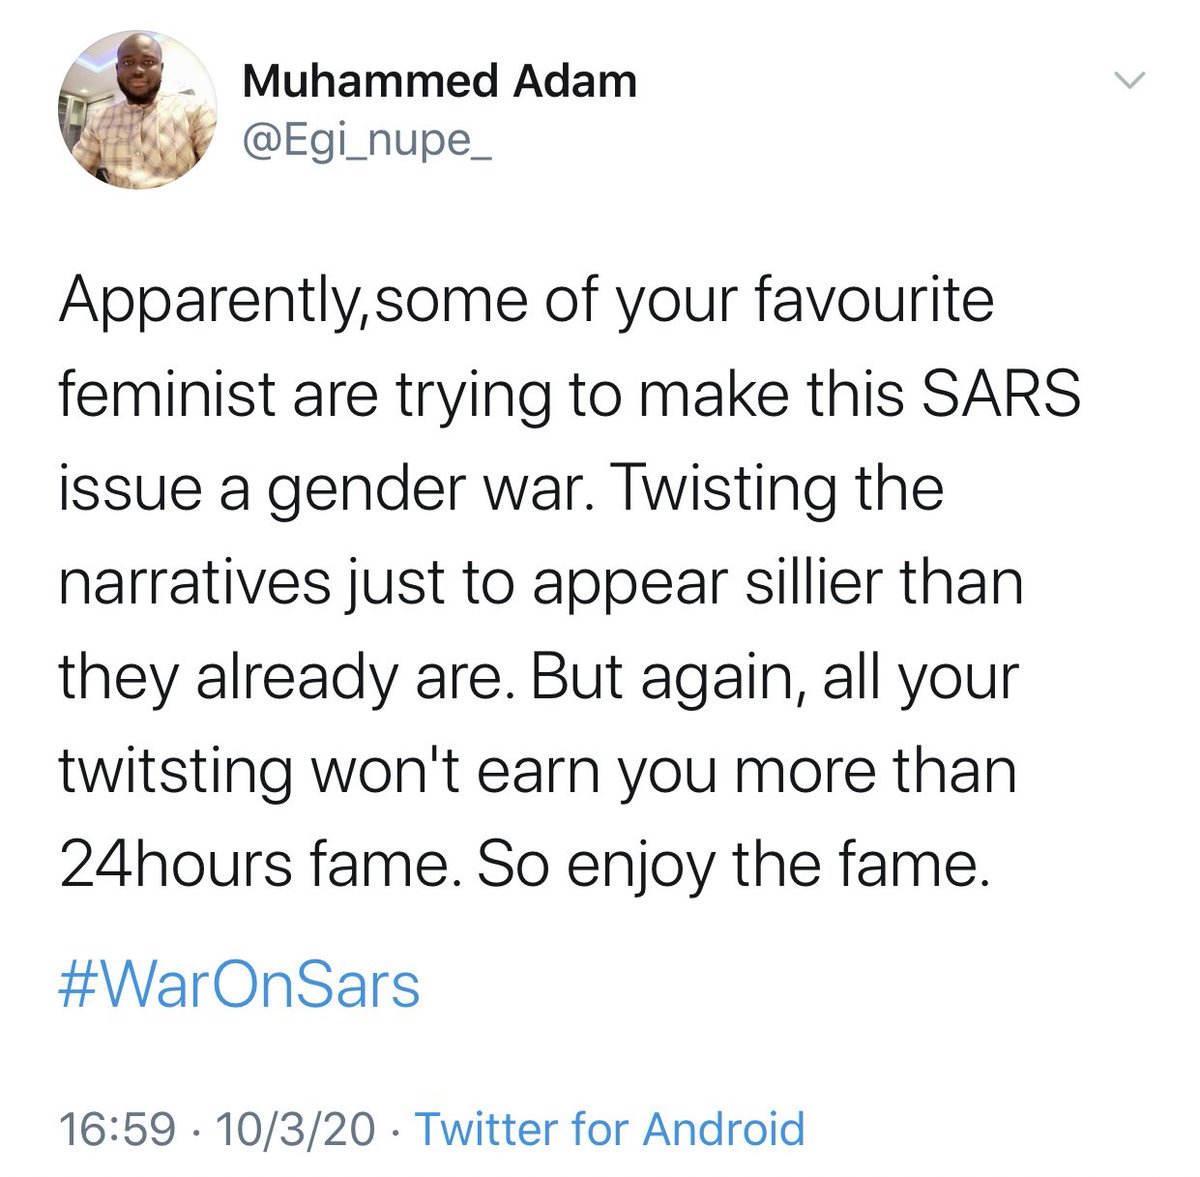 Maybe the e-feminists are also trying to remodel the male gender. SARS are men too.  #NotAllSars